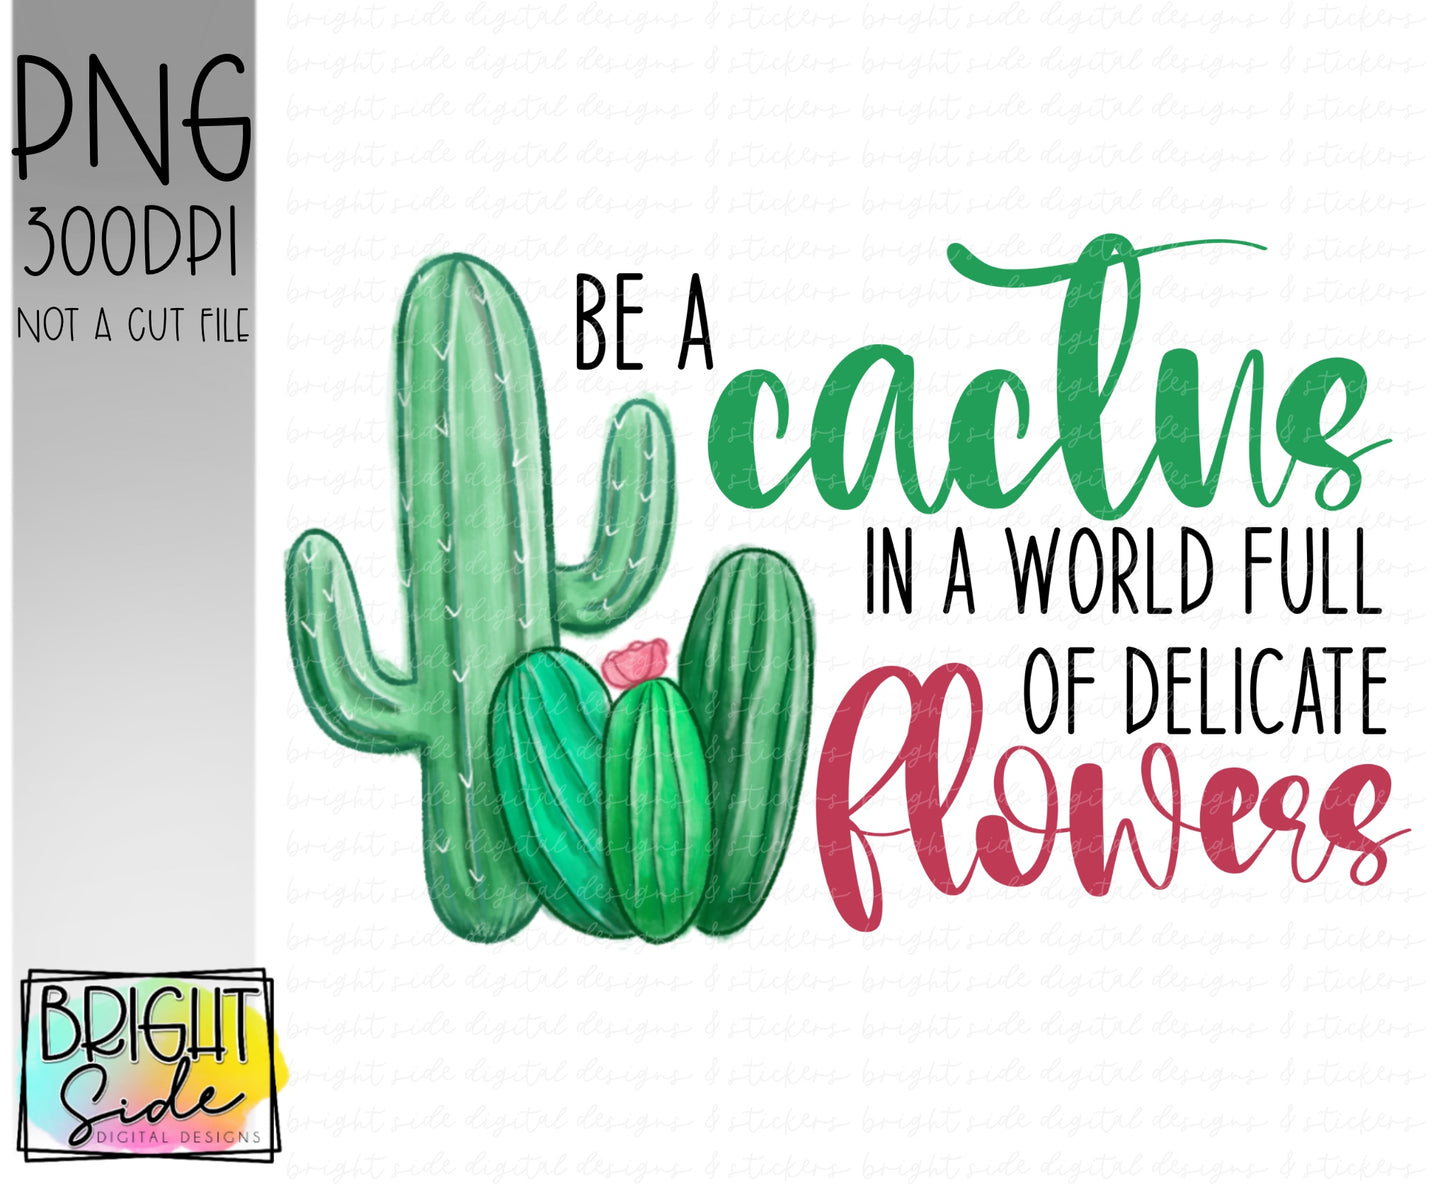 Be a cactus in a world full of delicate flowers